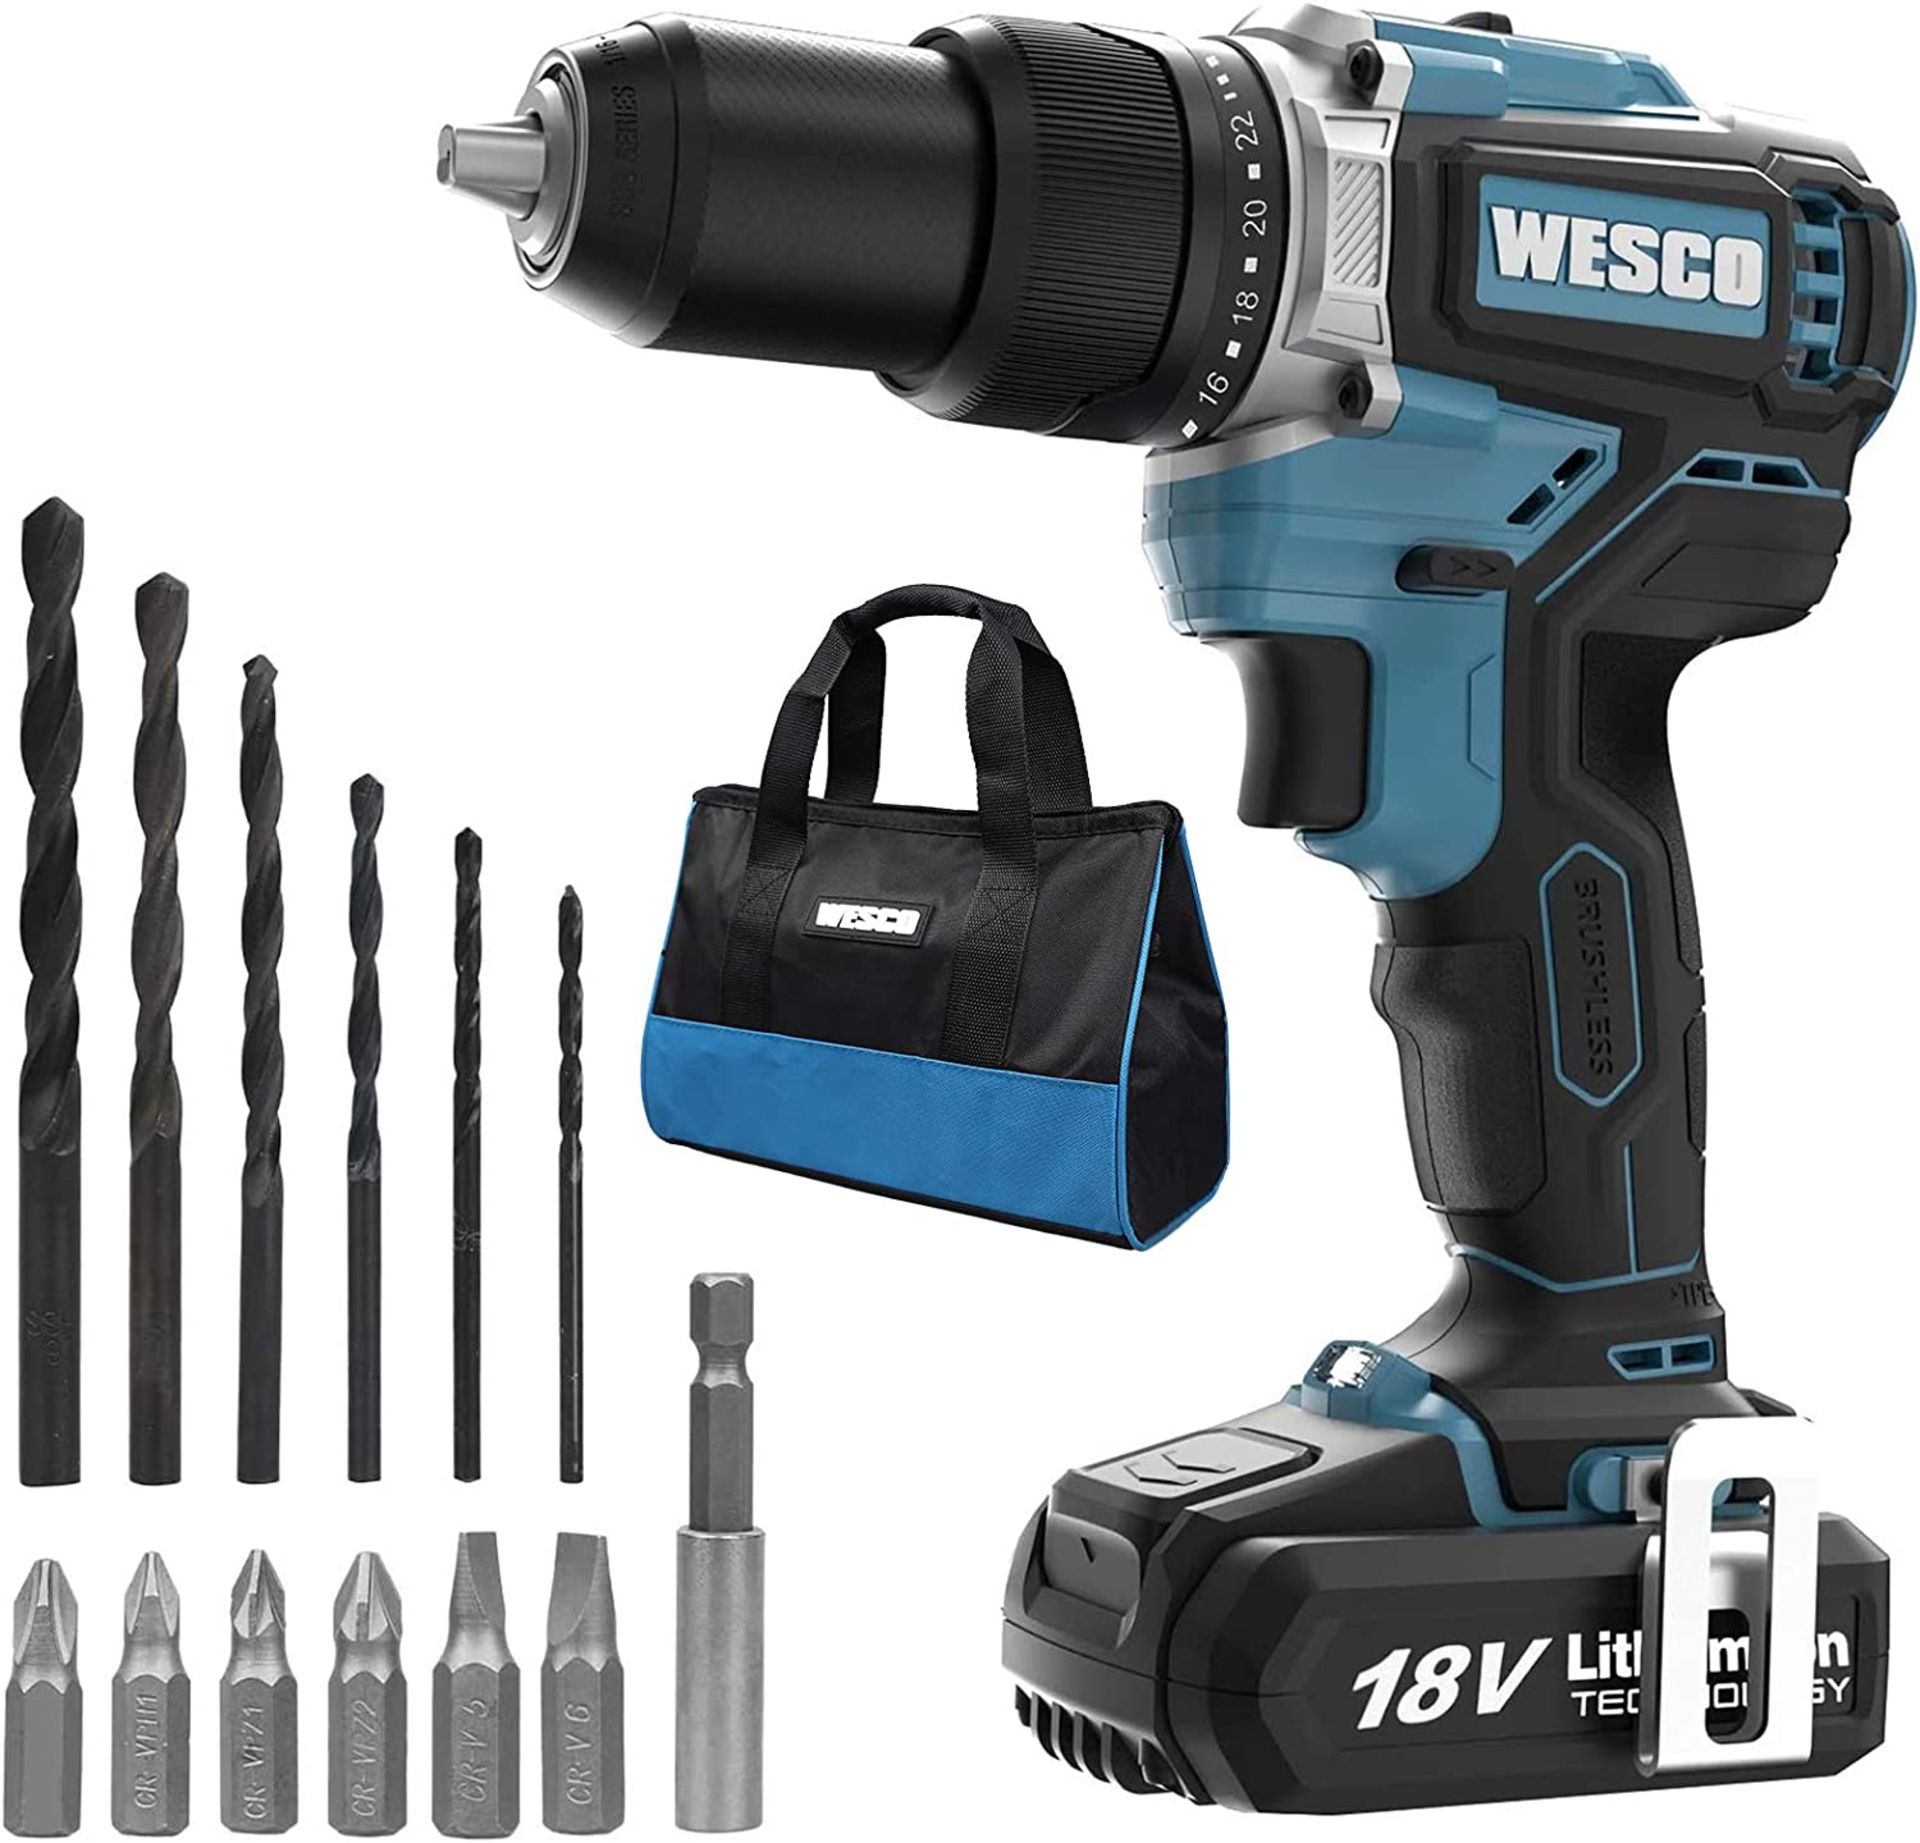 TARDE LOT 8 X NEW BOXED WESCO Brushless Cordless Drill, WESCO 18V 2.0Ah Cordless Combi Drill with 13